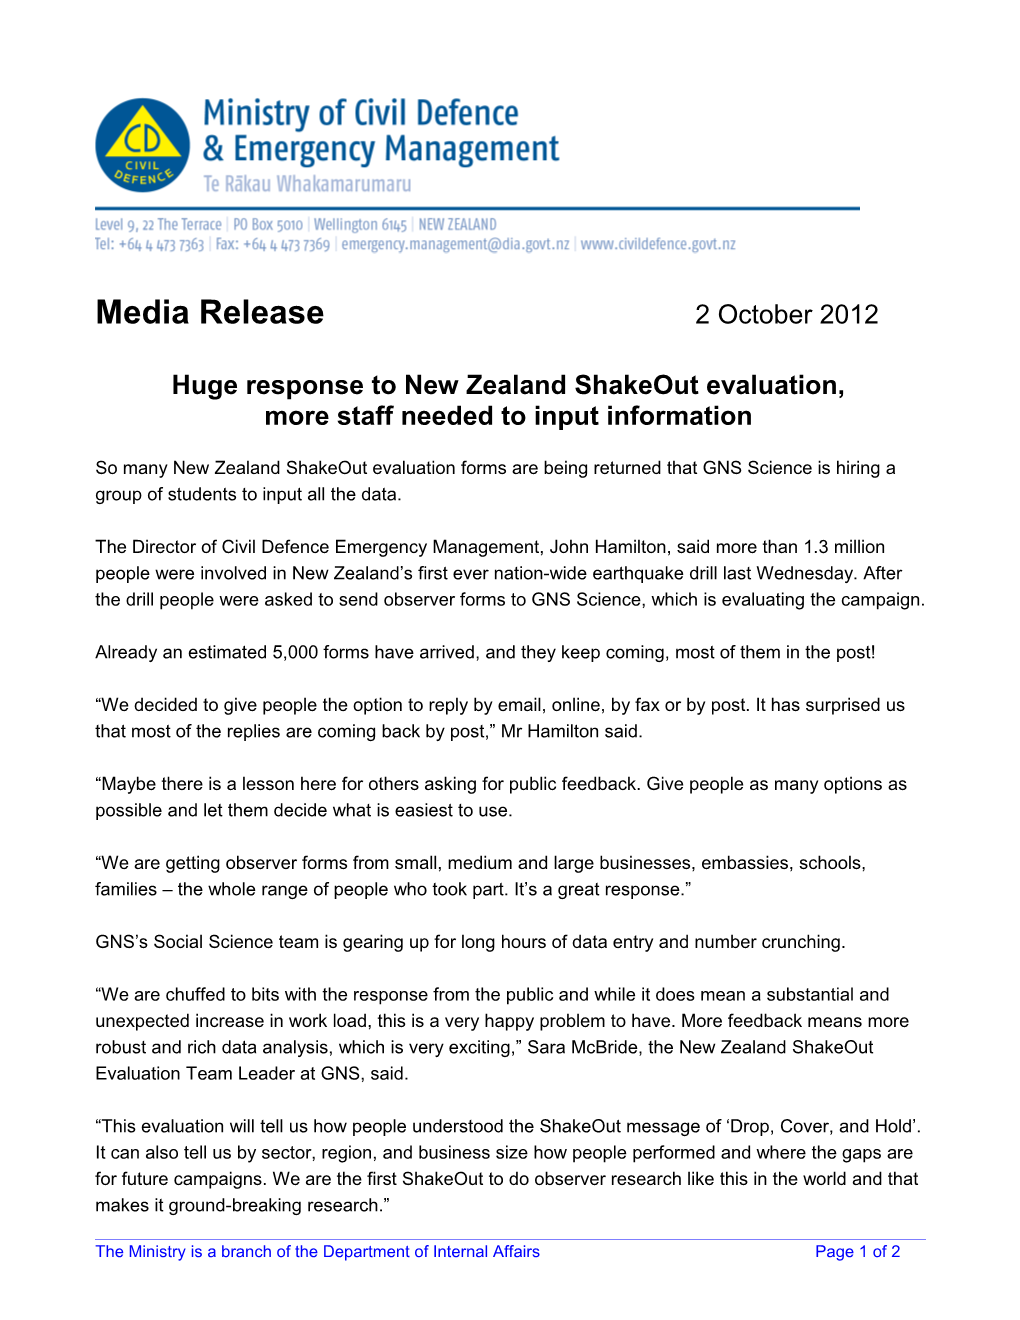 Huge Response to New Zealand Shakeout Evaluation,More Staff Needed to Input Information